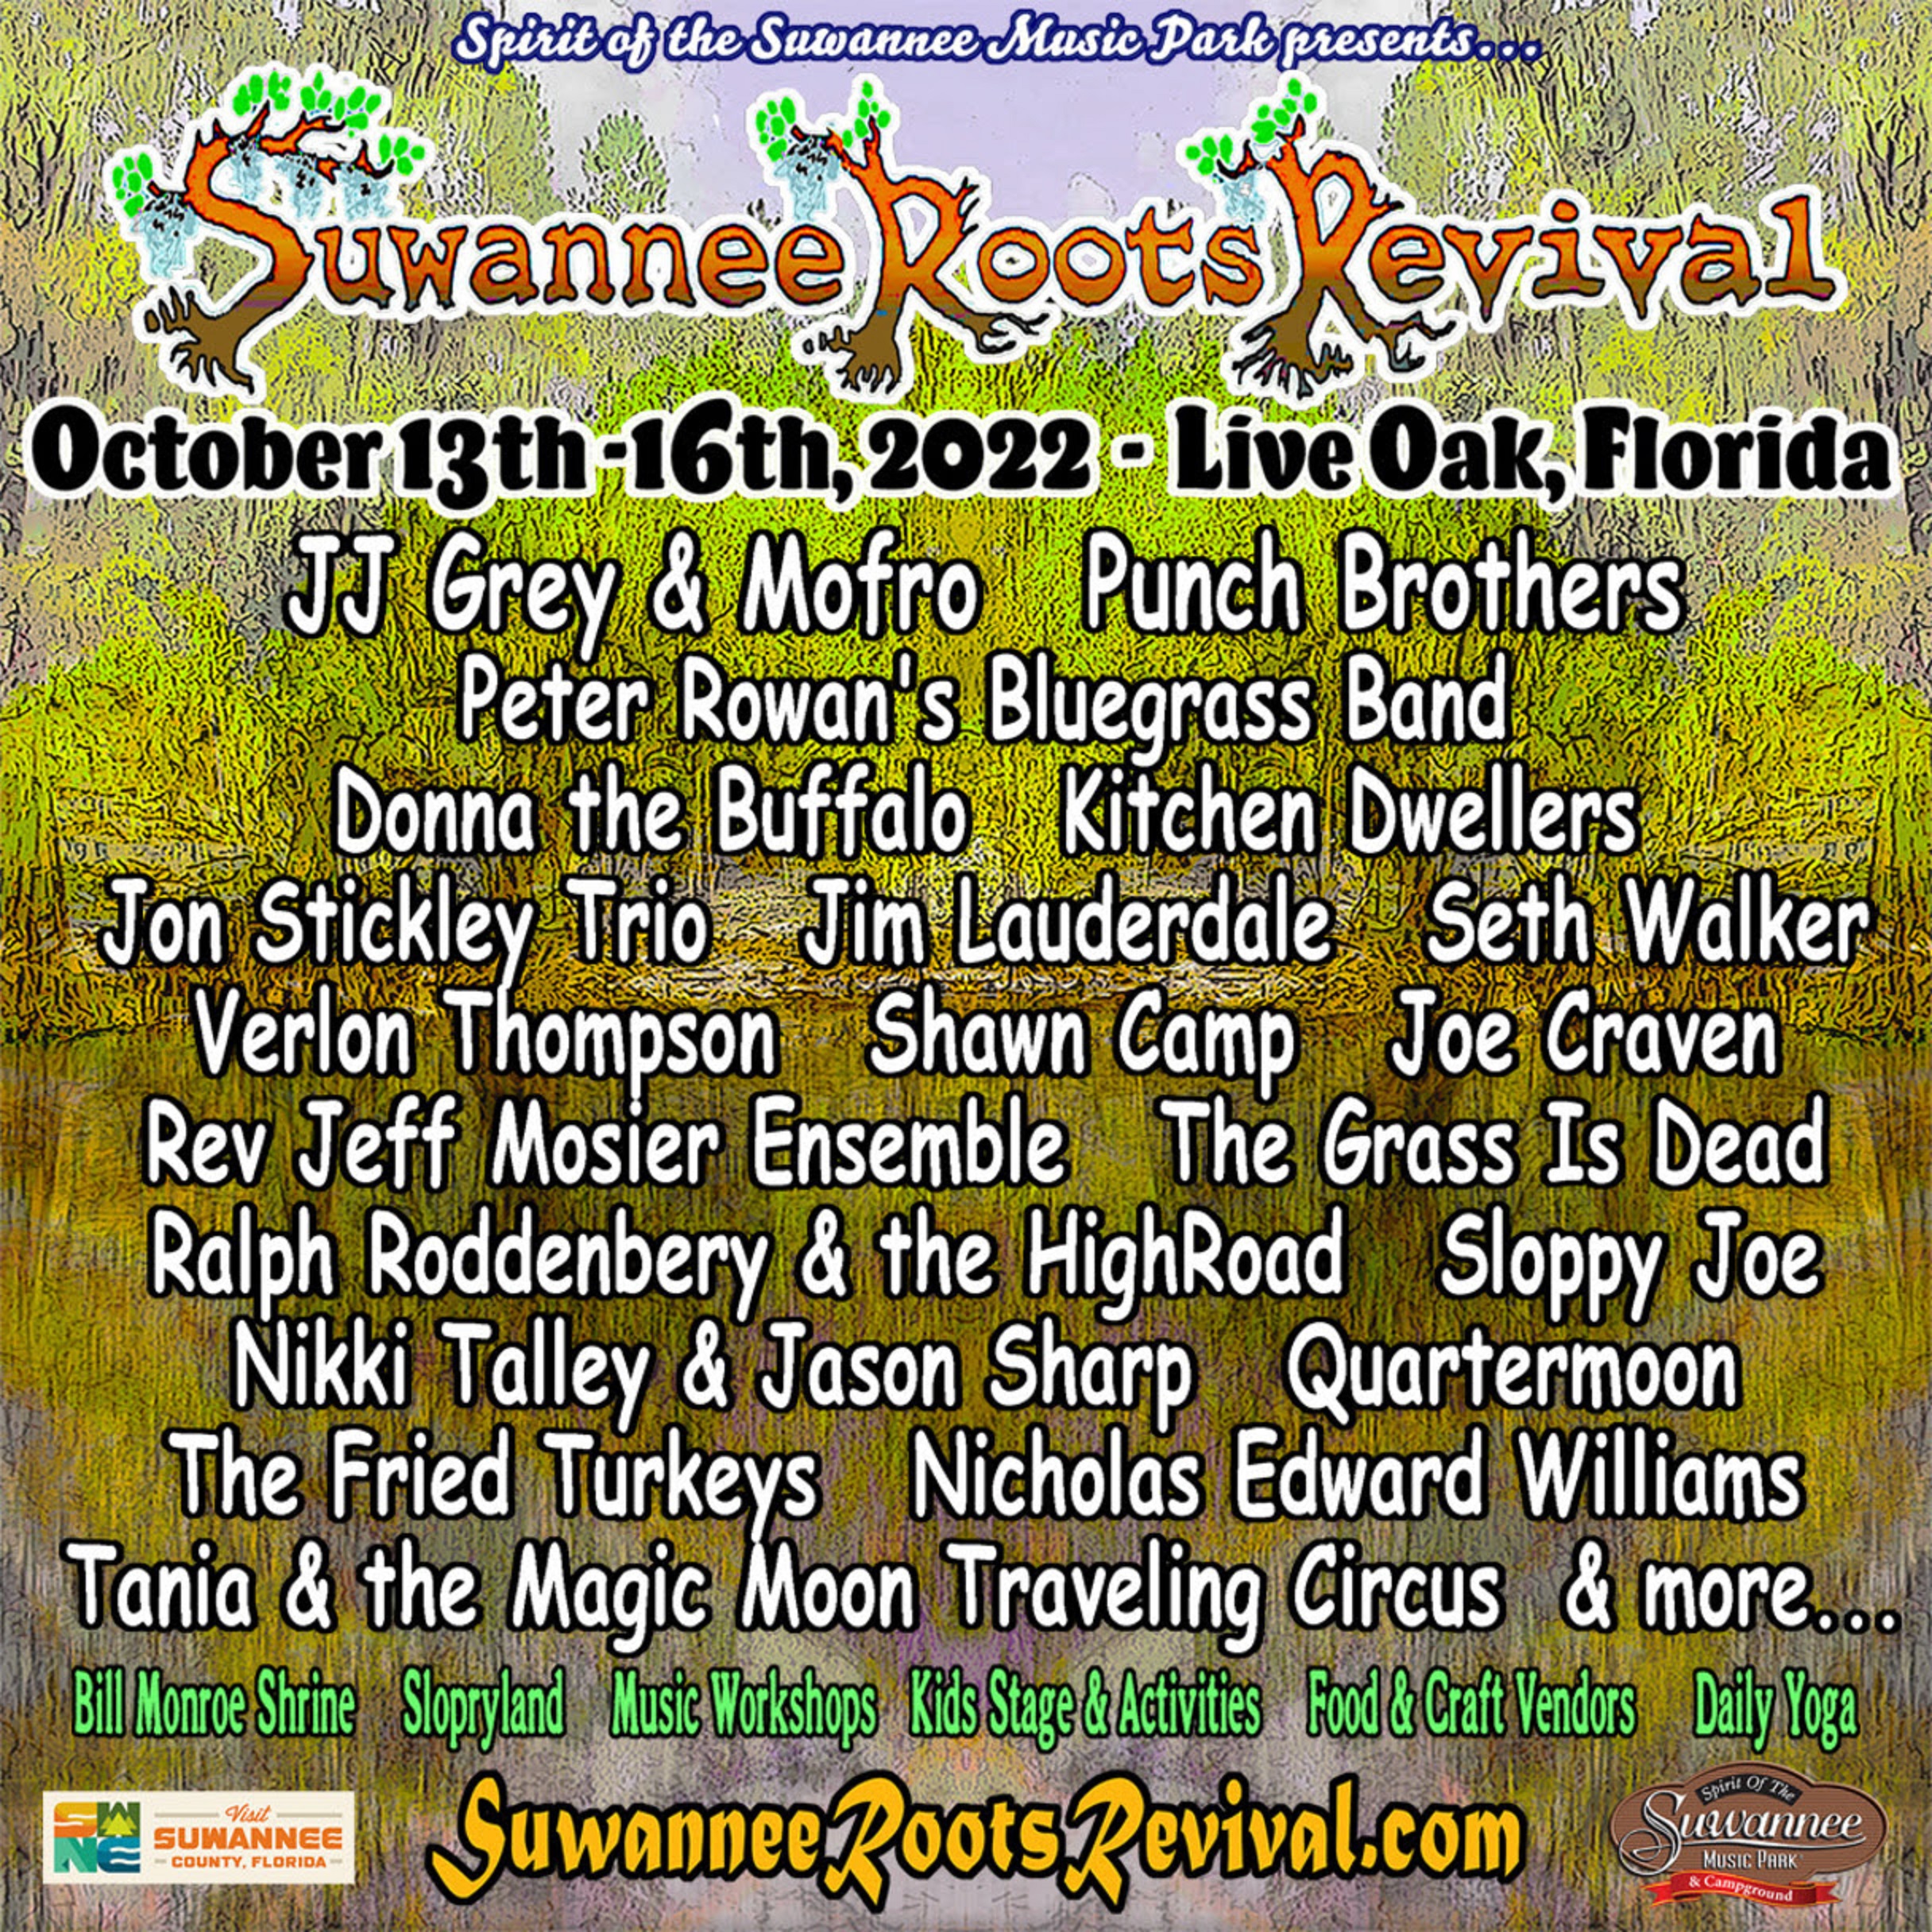 Suwannee Roots Revival Oct 1316 w/ JJ Grey & Mofro, Punch Brothers